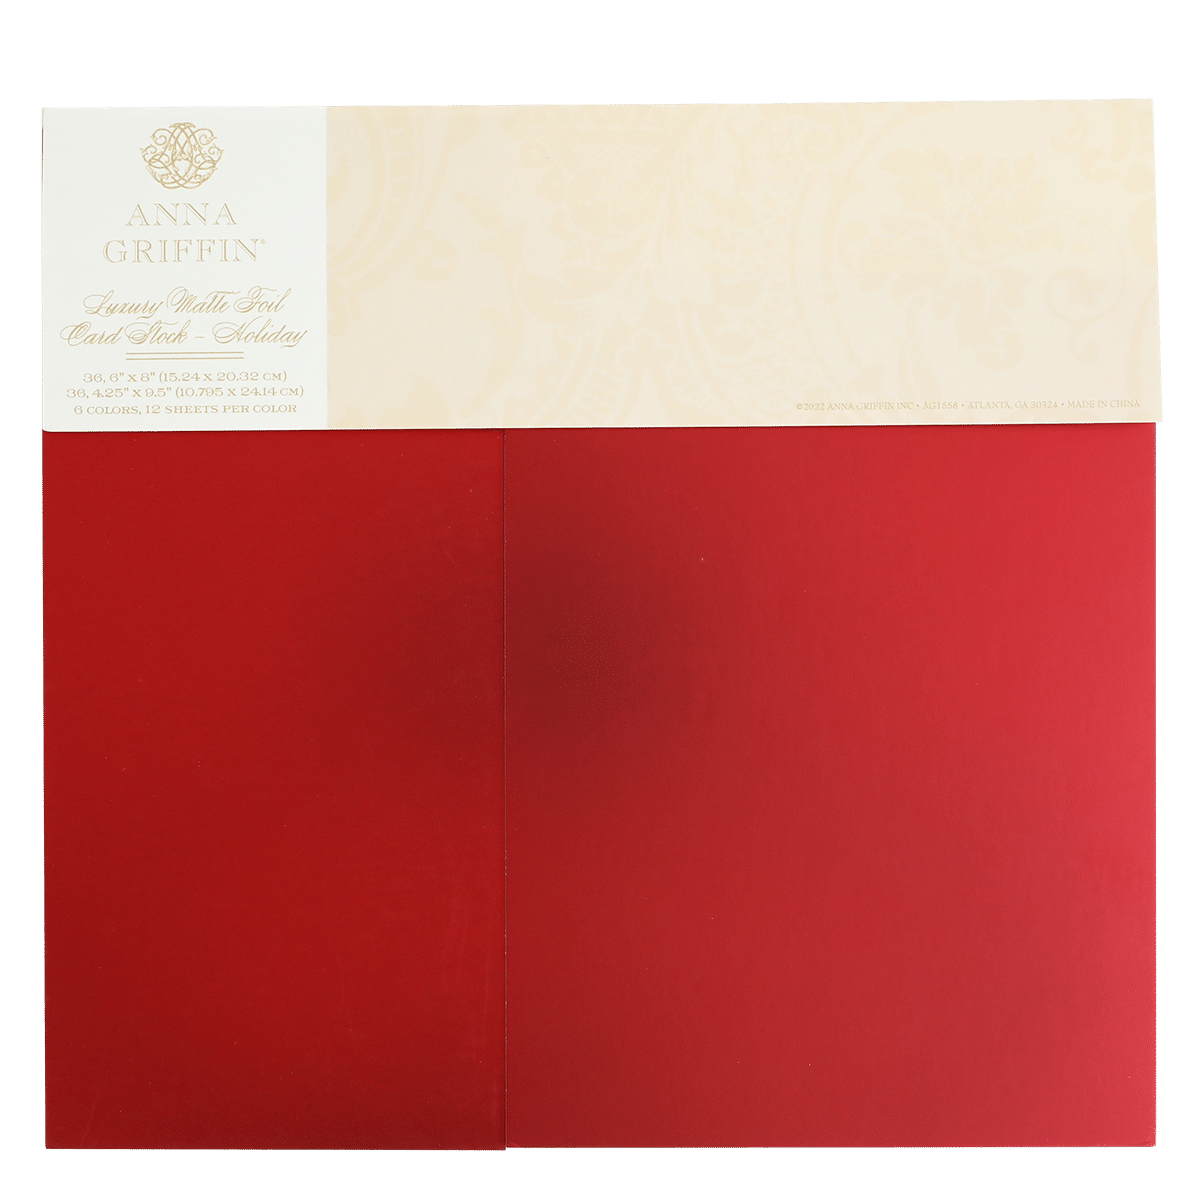 RED/GOLD MADRAS PLAID 12X12 CARDSTOCK – Anna Griffin Inc.